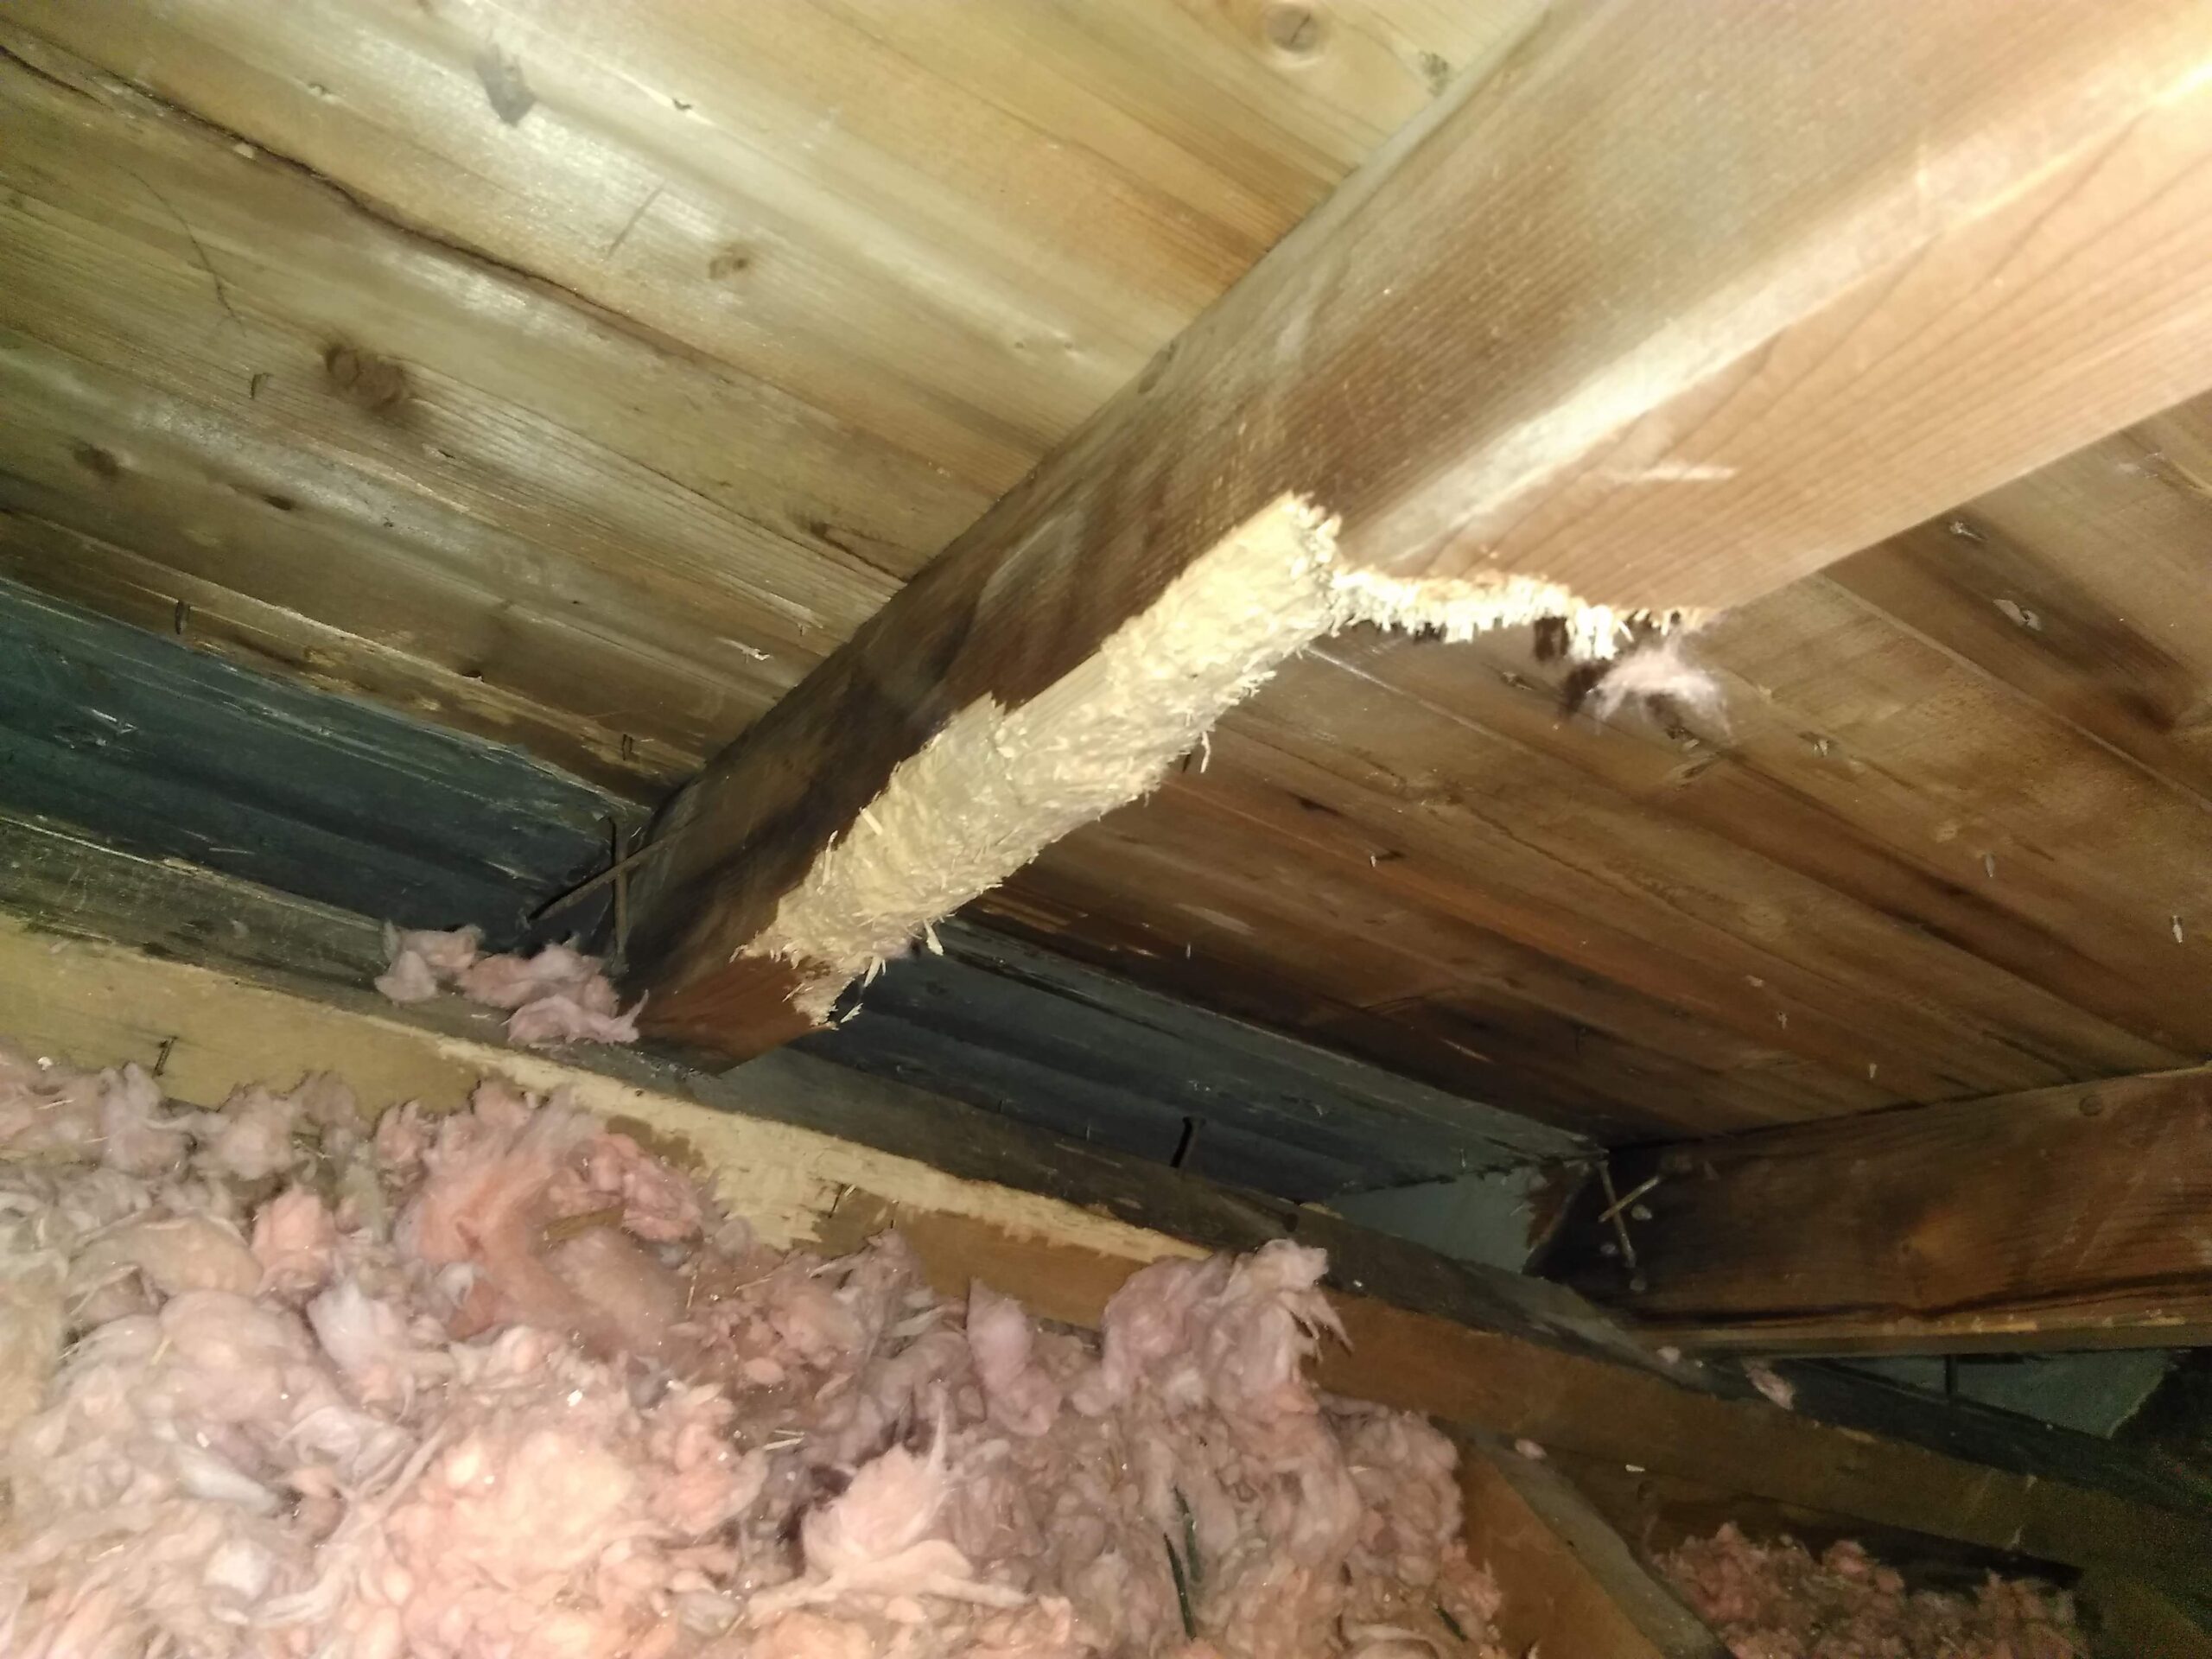 Inside attics, squirrels do tremendous amounts of damage to your insulation.